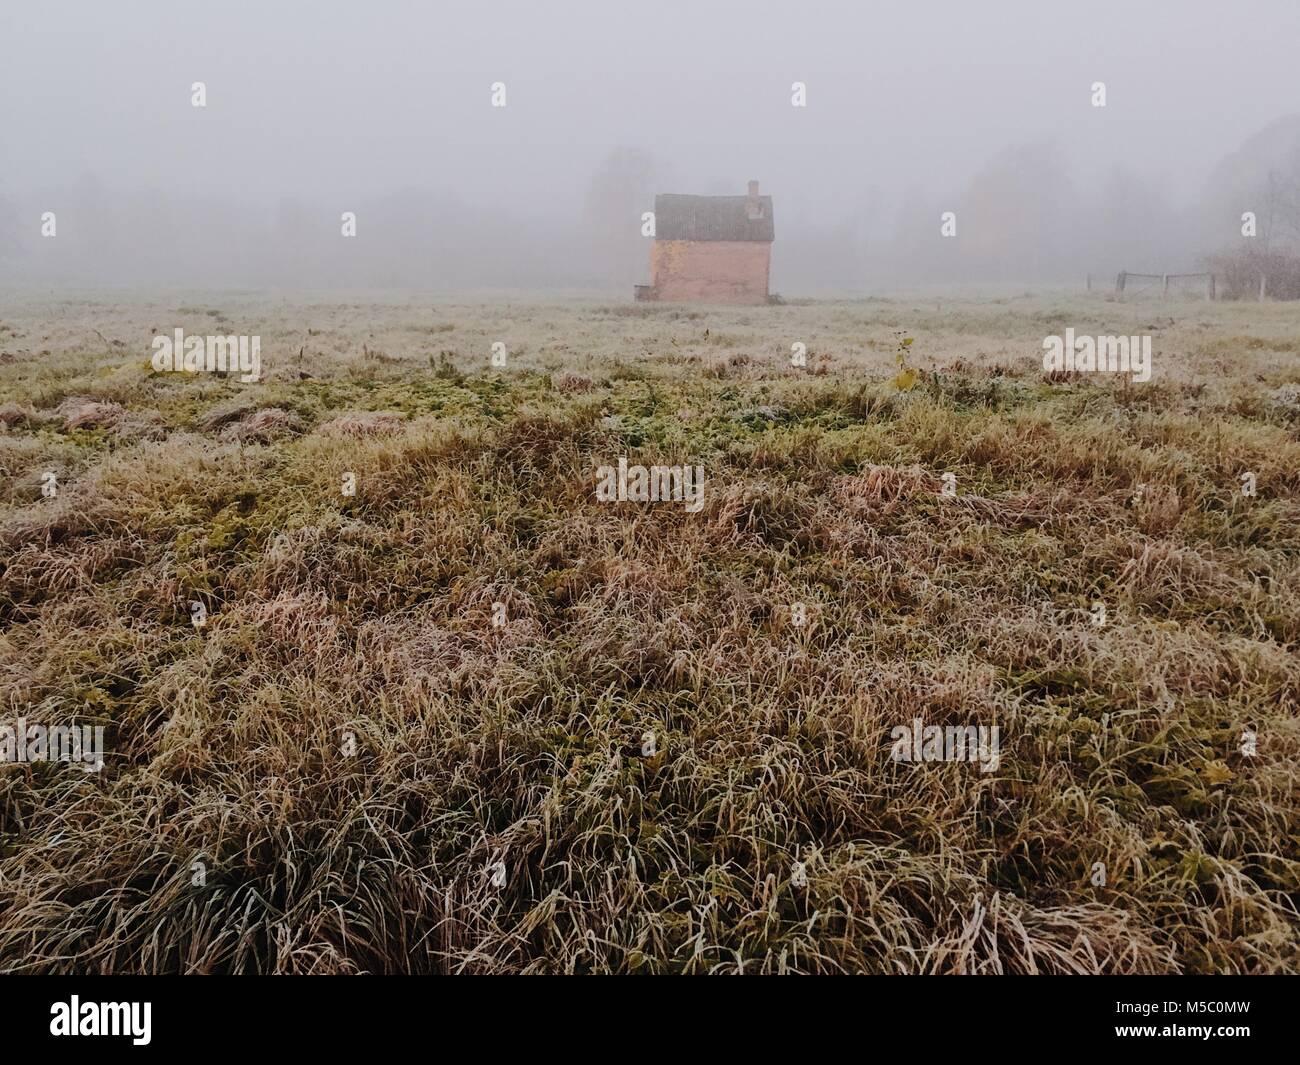 Grass field. Beautiful foggy morning scene with a little shed. Stock Photo